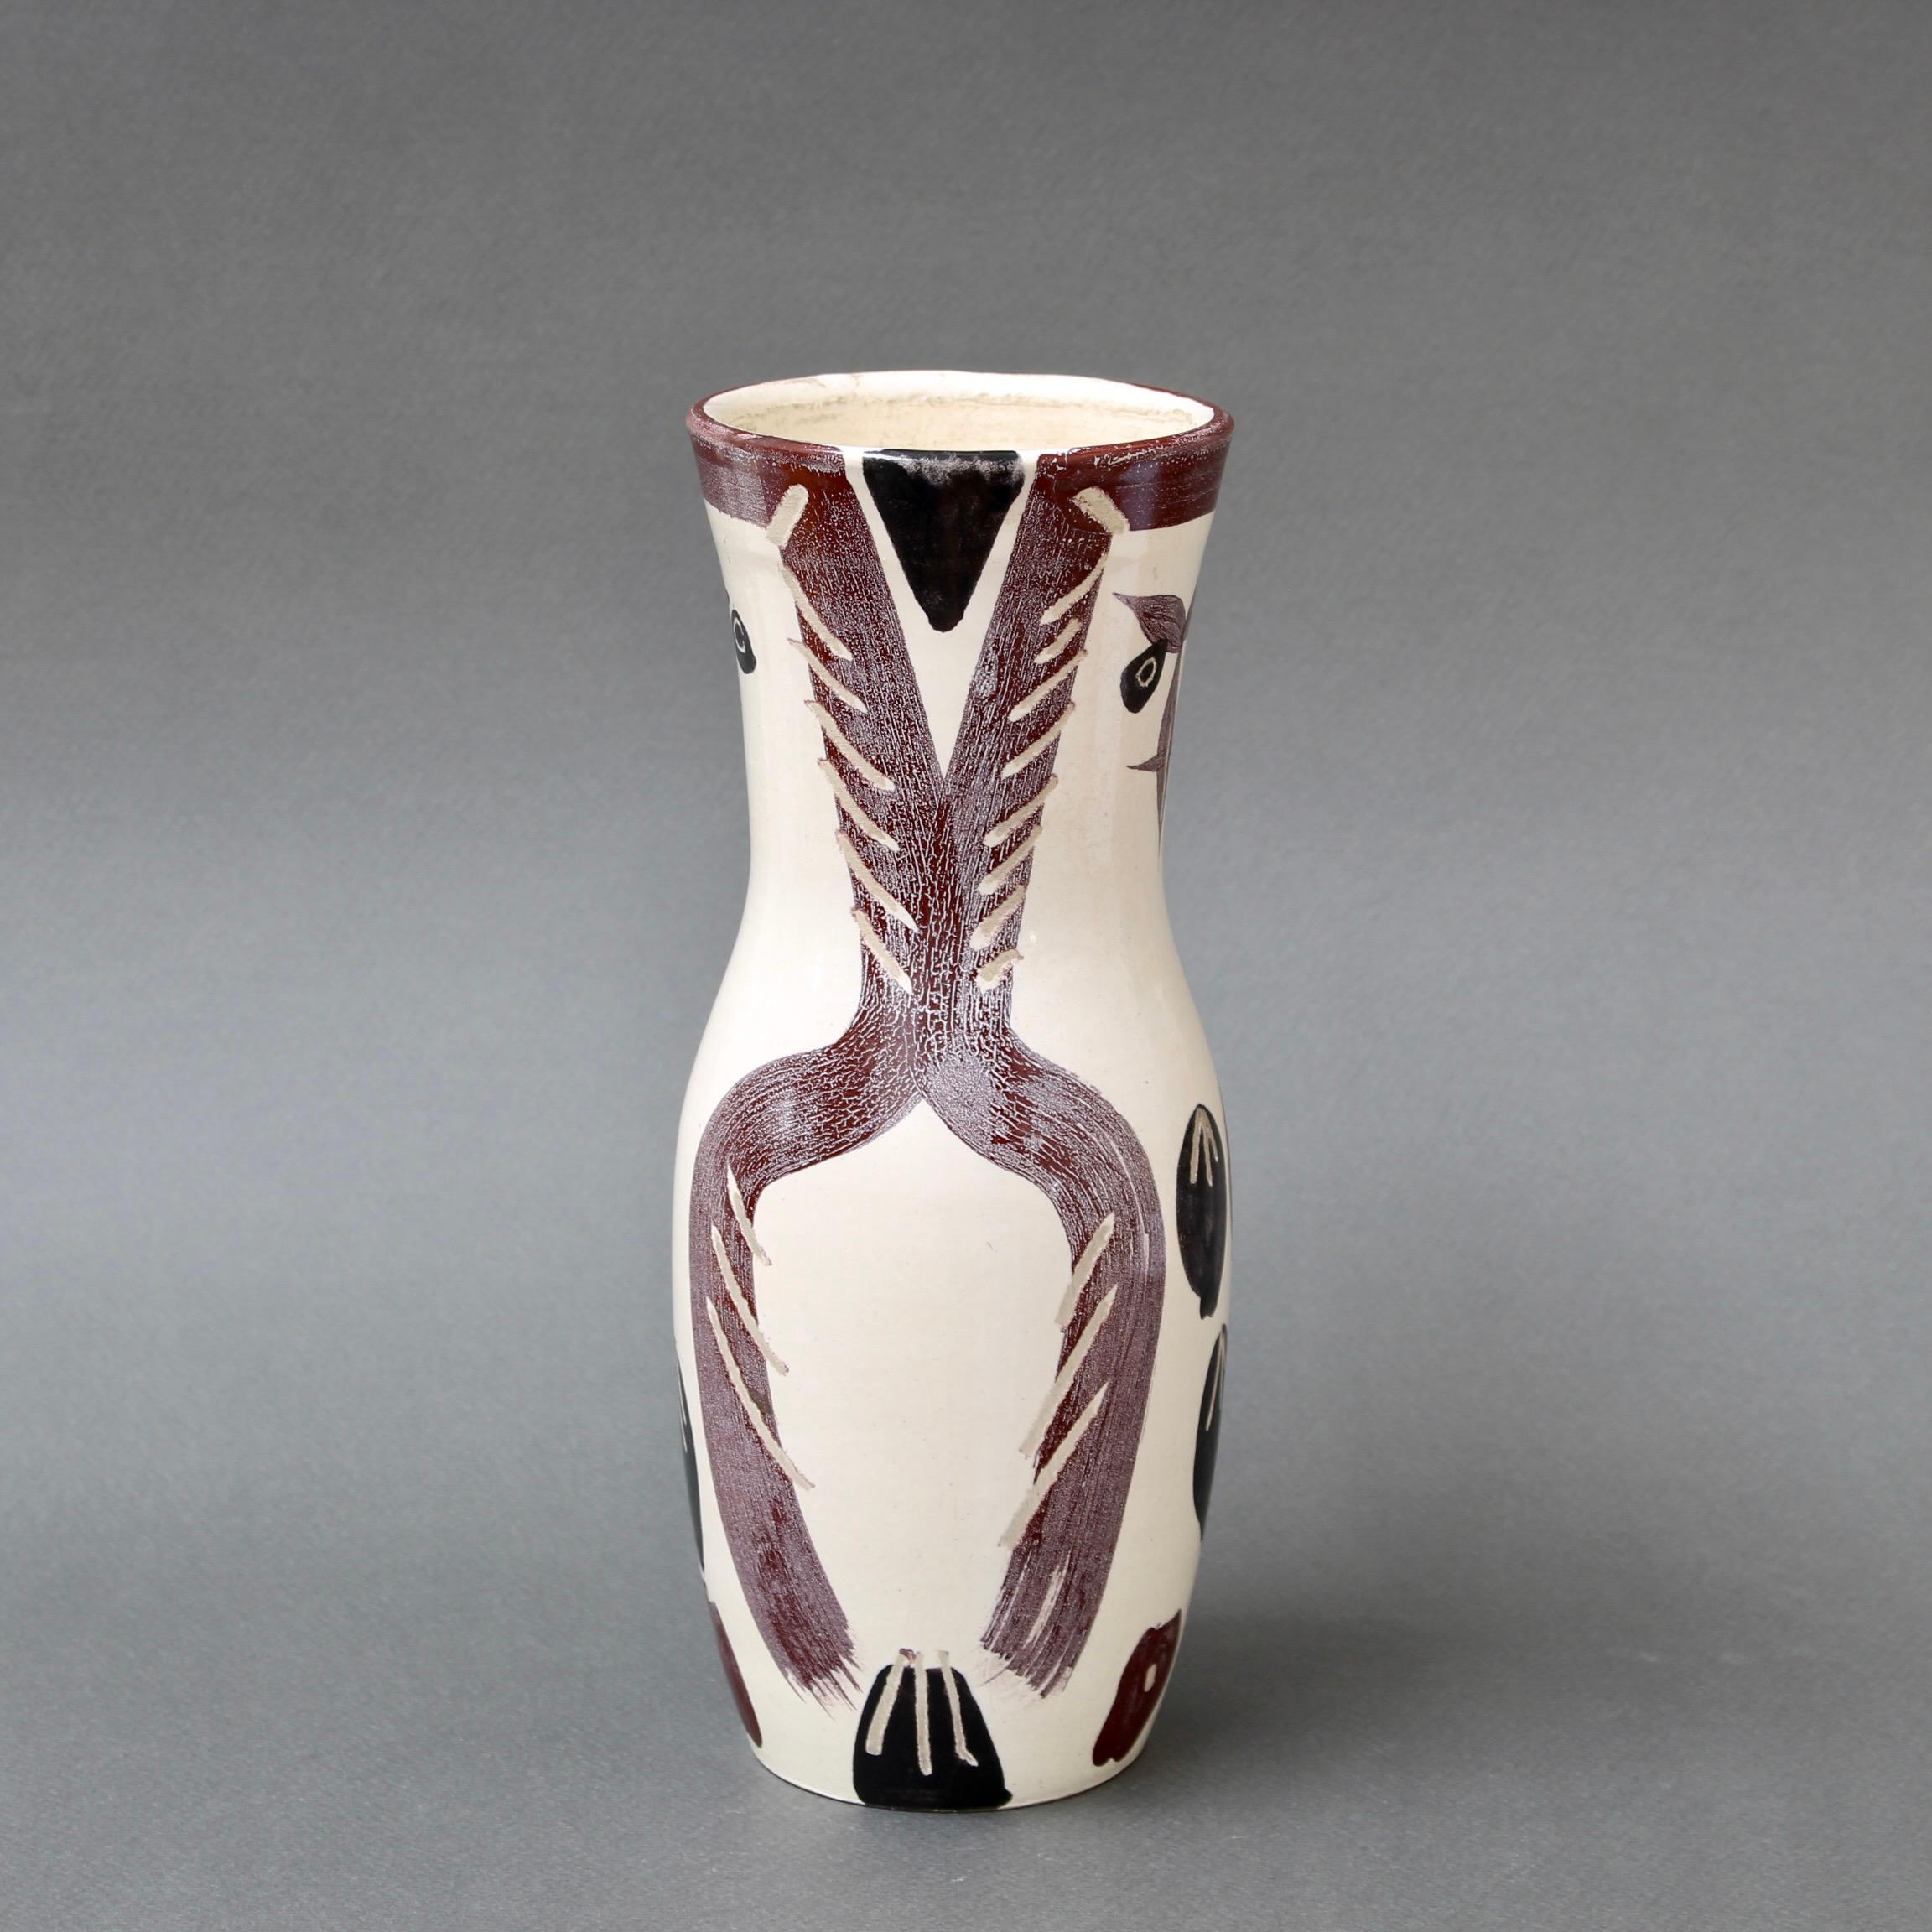 Ceramic Owl Vase (A.R. 135) from the Madoura Pottery by Pablo Picasso For Sale 3